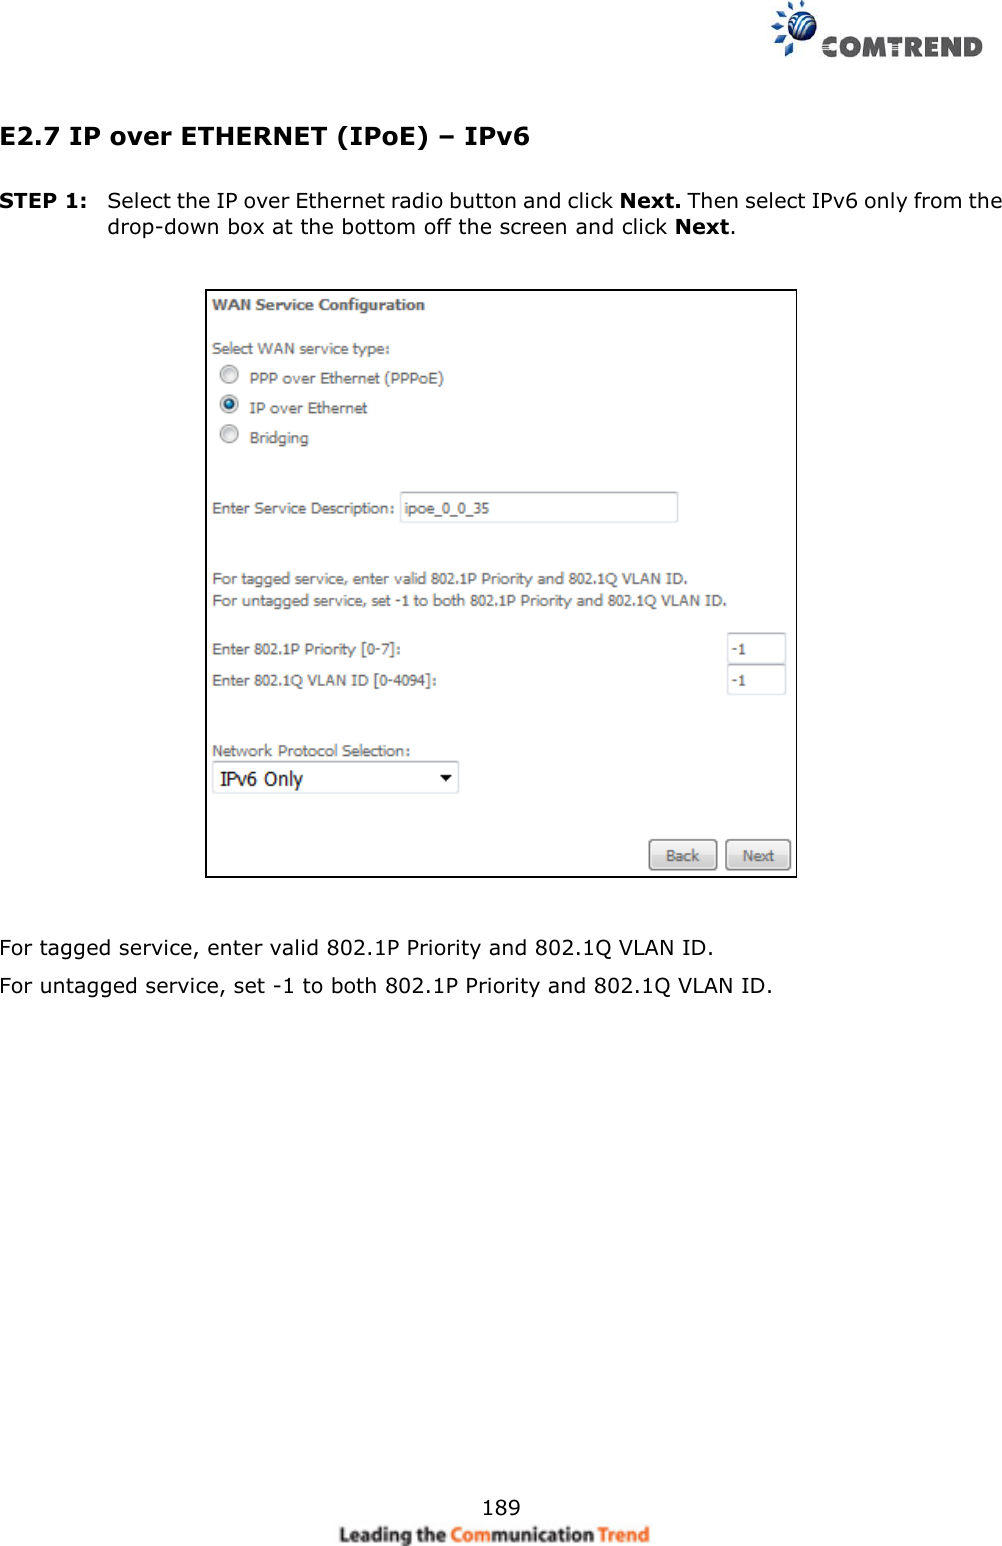     189 E2.7 IP over ETHERNET (IPoE) – IPv6 STEP 1:  Select the IP over Ethernet radio button and click Next. Then select IPv6 only from the drop-down box at the bottom off the screen and click Next.        For tagged service, enter valid 802.1P Priority and 802.1Q VLAN ID. For untagged service, set -1 to both 802.1P Priority and 802.1Q VLAN ID.   